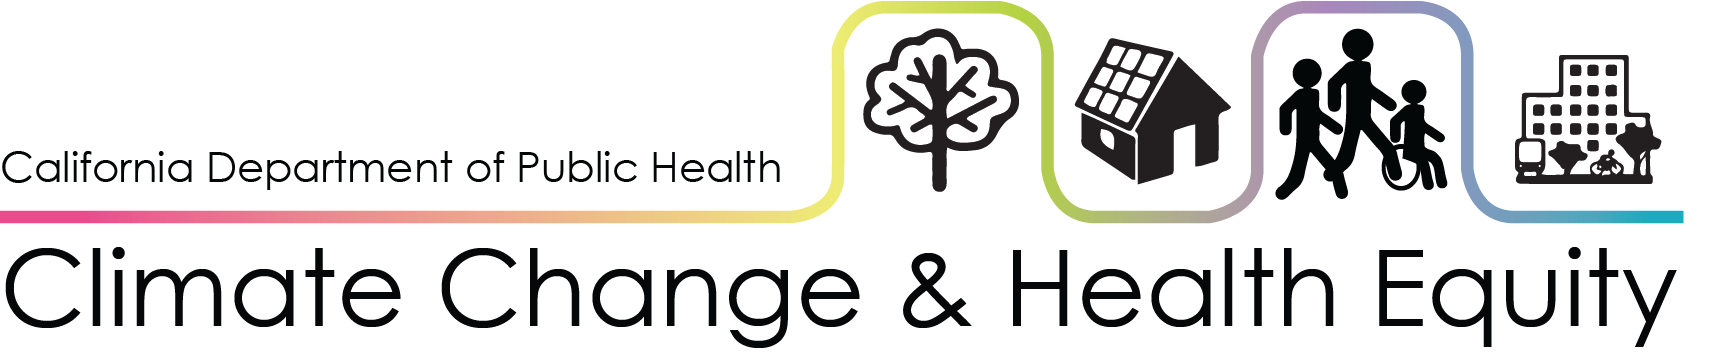 Logo - CDPH Climate Change & Health Equity (CCHE) Branch